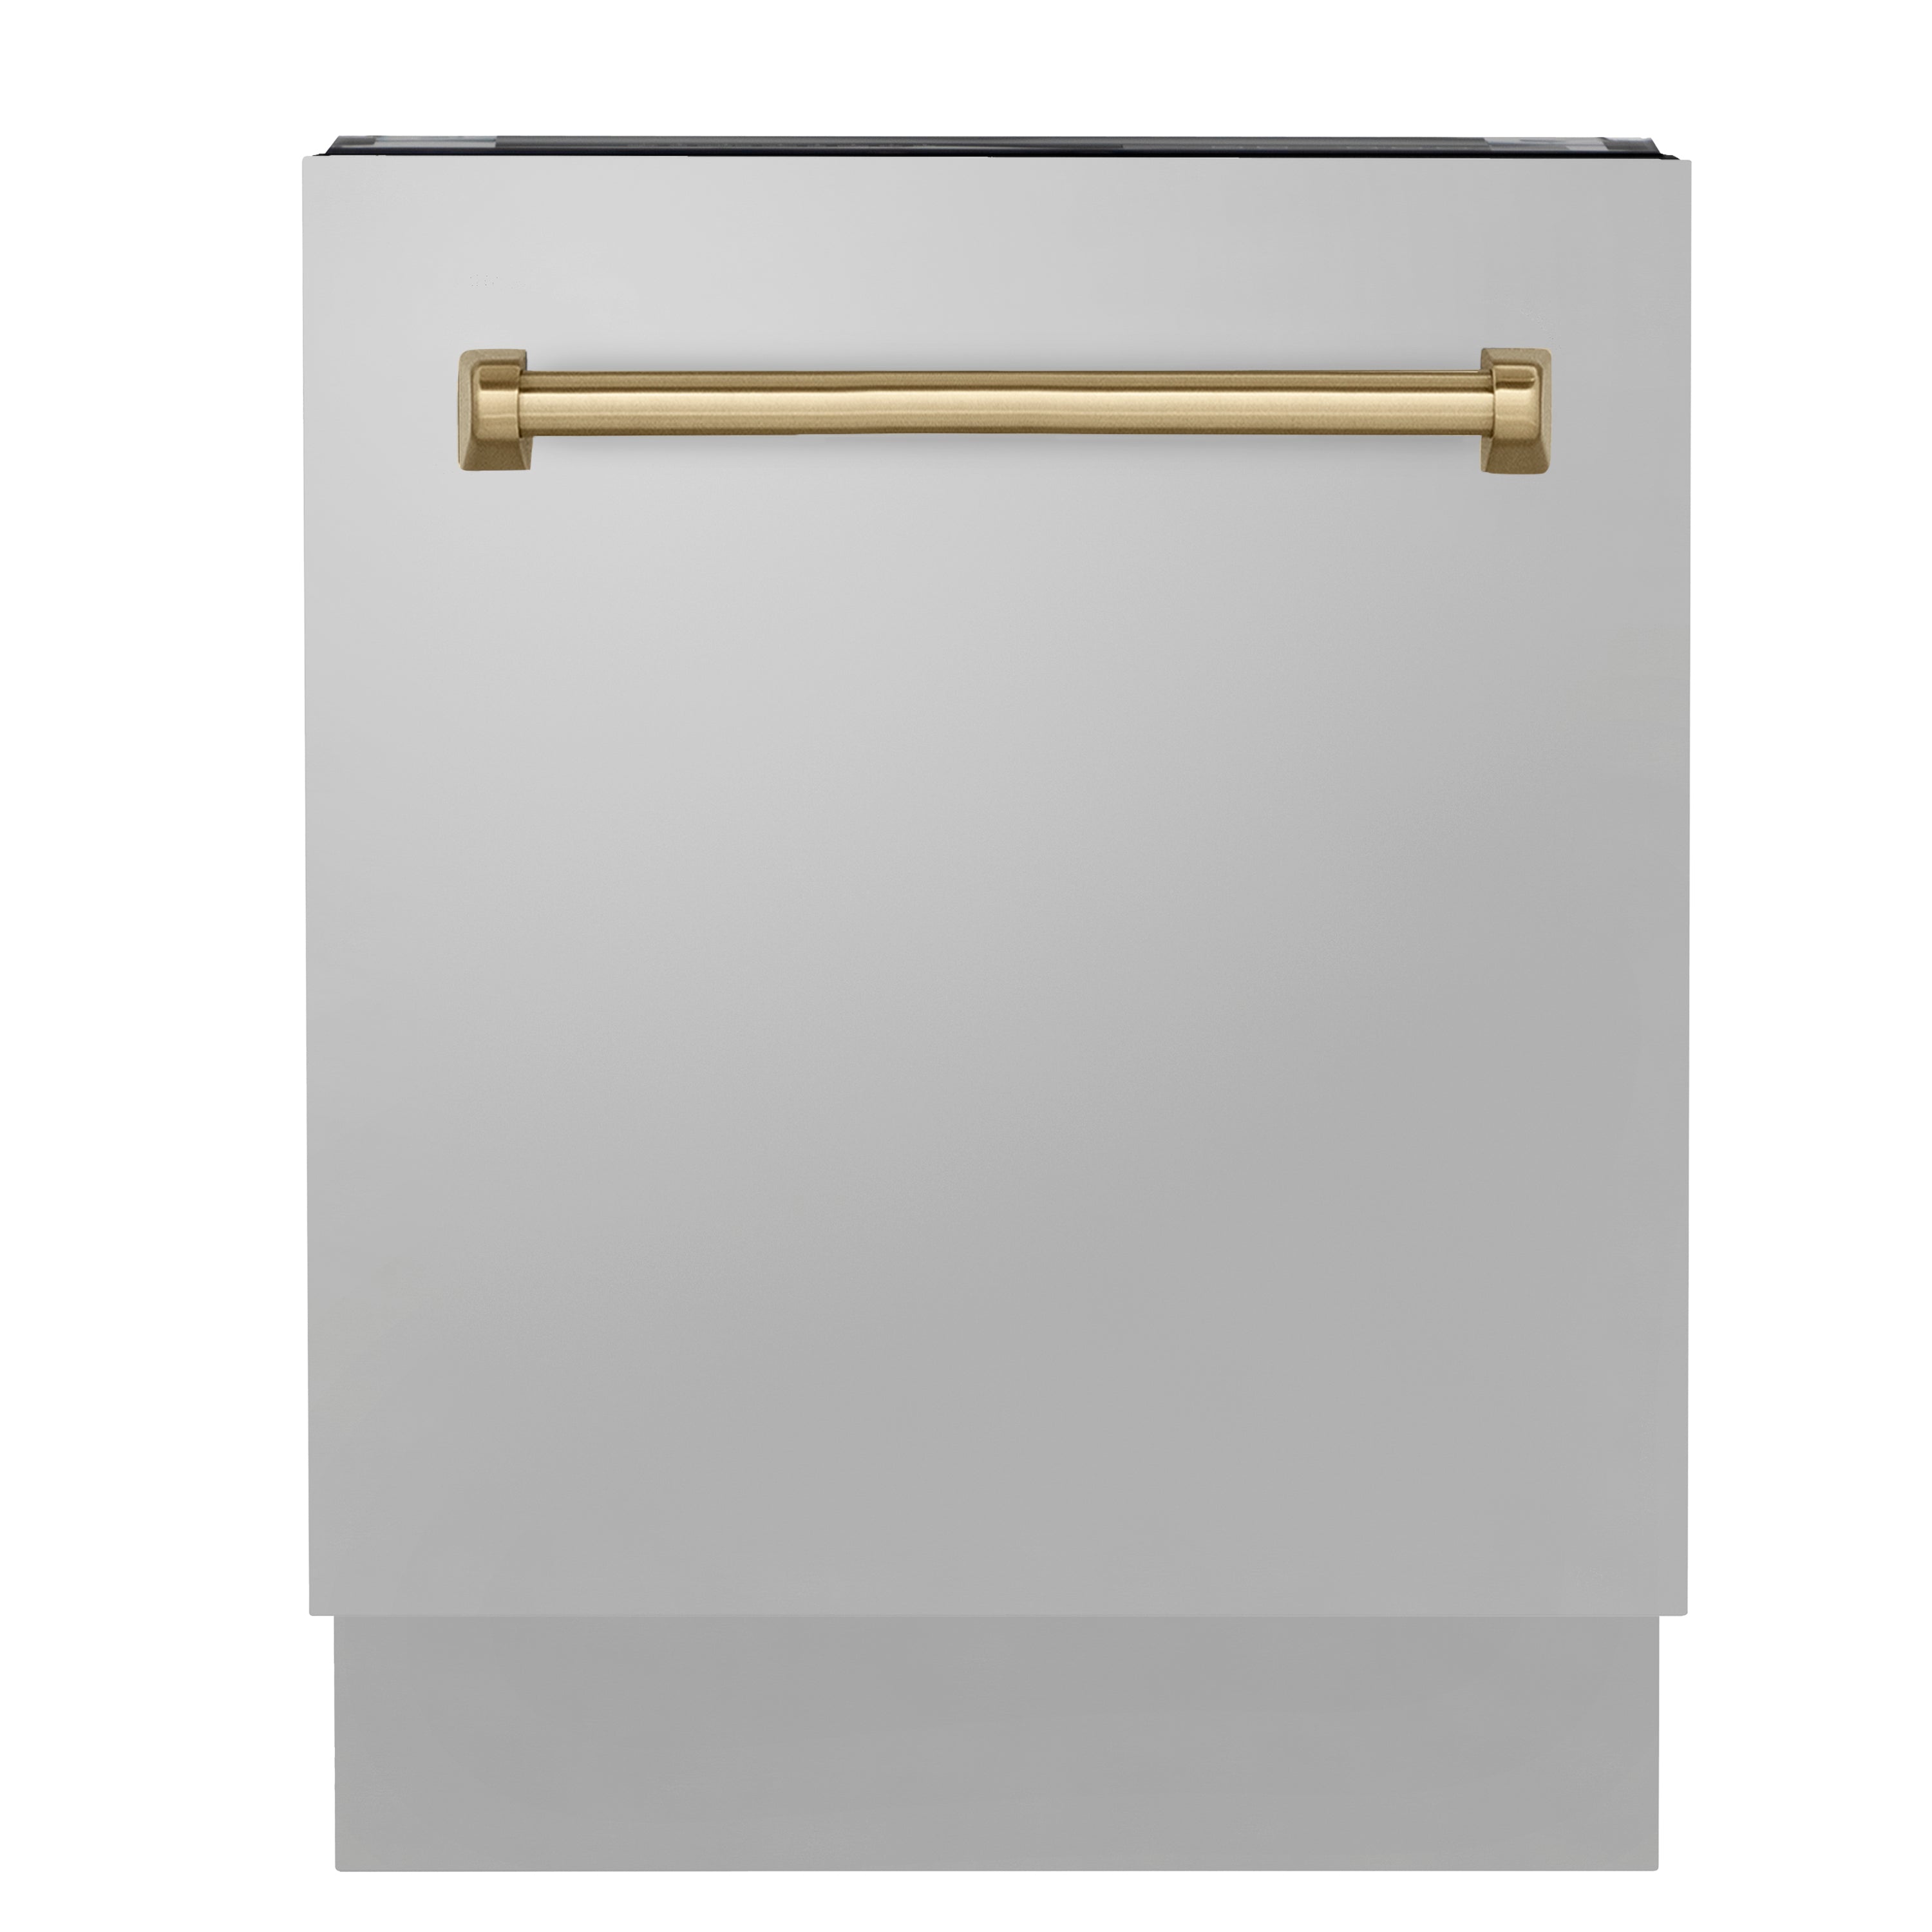 ZLINE Autograph Edition 24" 3rd Rack Top Control Built-In Tall Tub Dishwasher in Stainless Steel with Champagne Bronze Handle, 51dBa (DWVZ-304-24-CB)